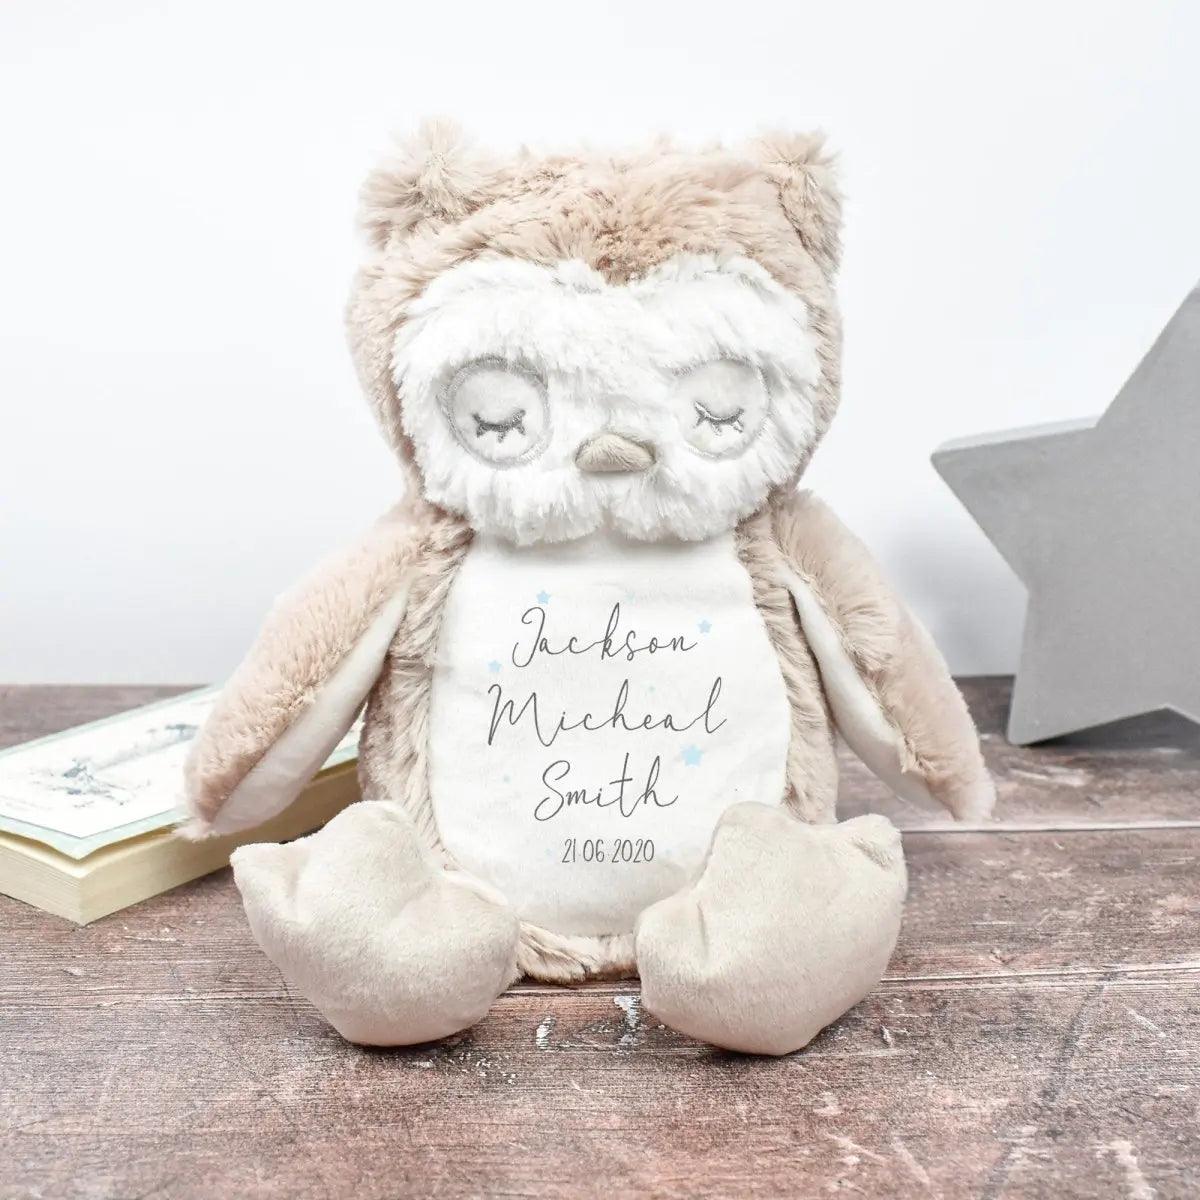 Personalised Baby Owl, New Baby Gift, Customised Plush Soft Toy, Your Name Teddy, Birth Cuddly Toy, Birth Name Date Teddy, Baby Shower Gift